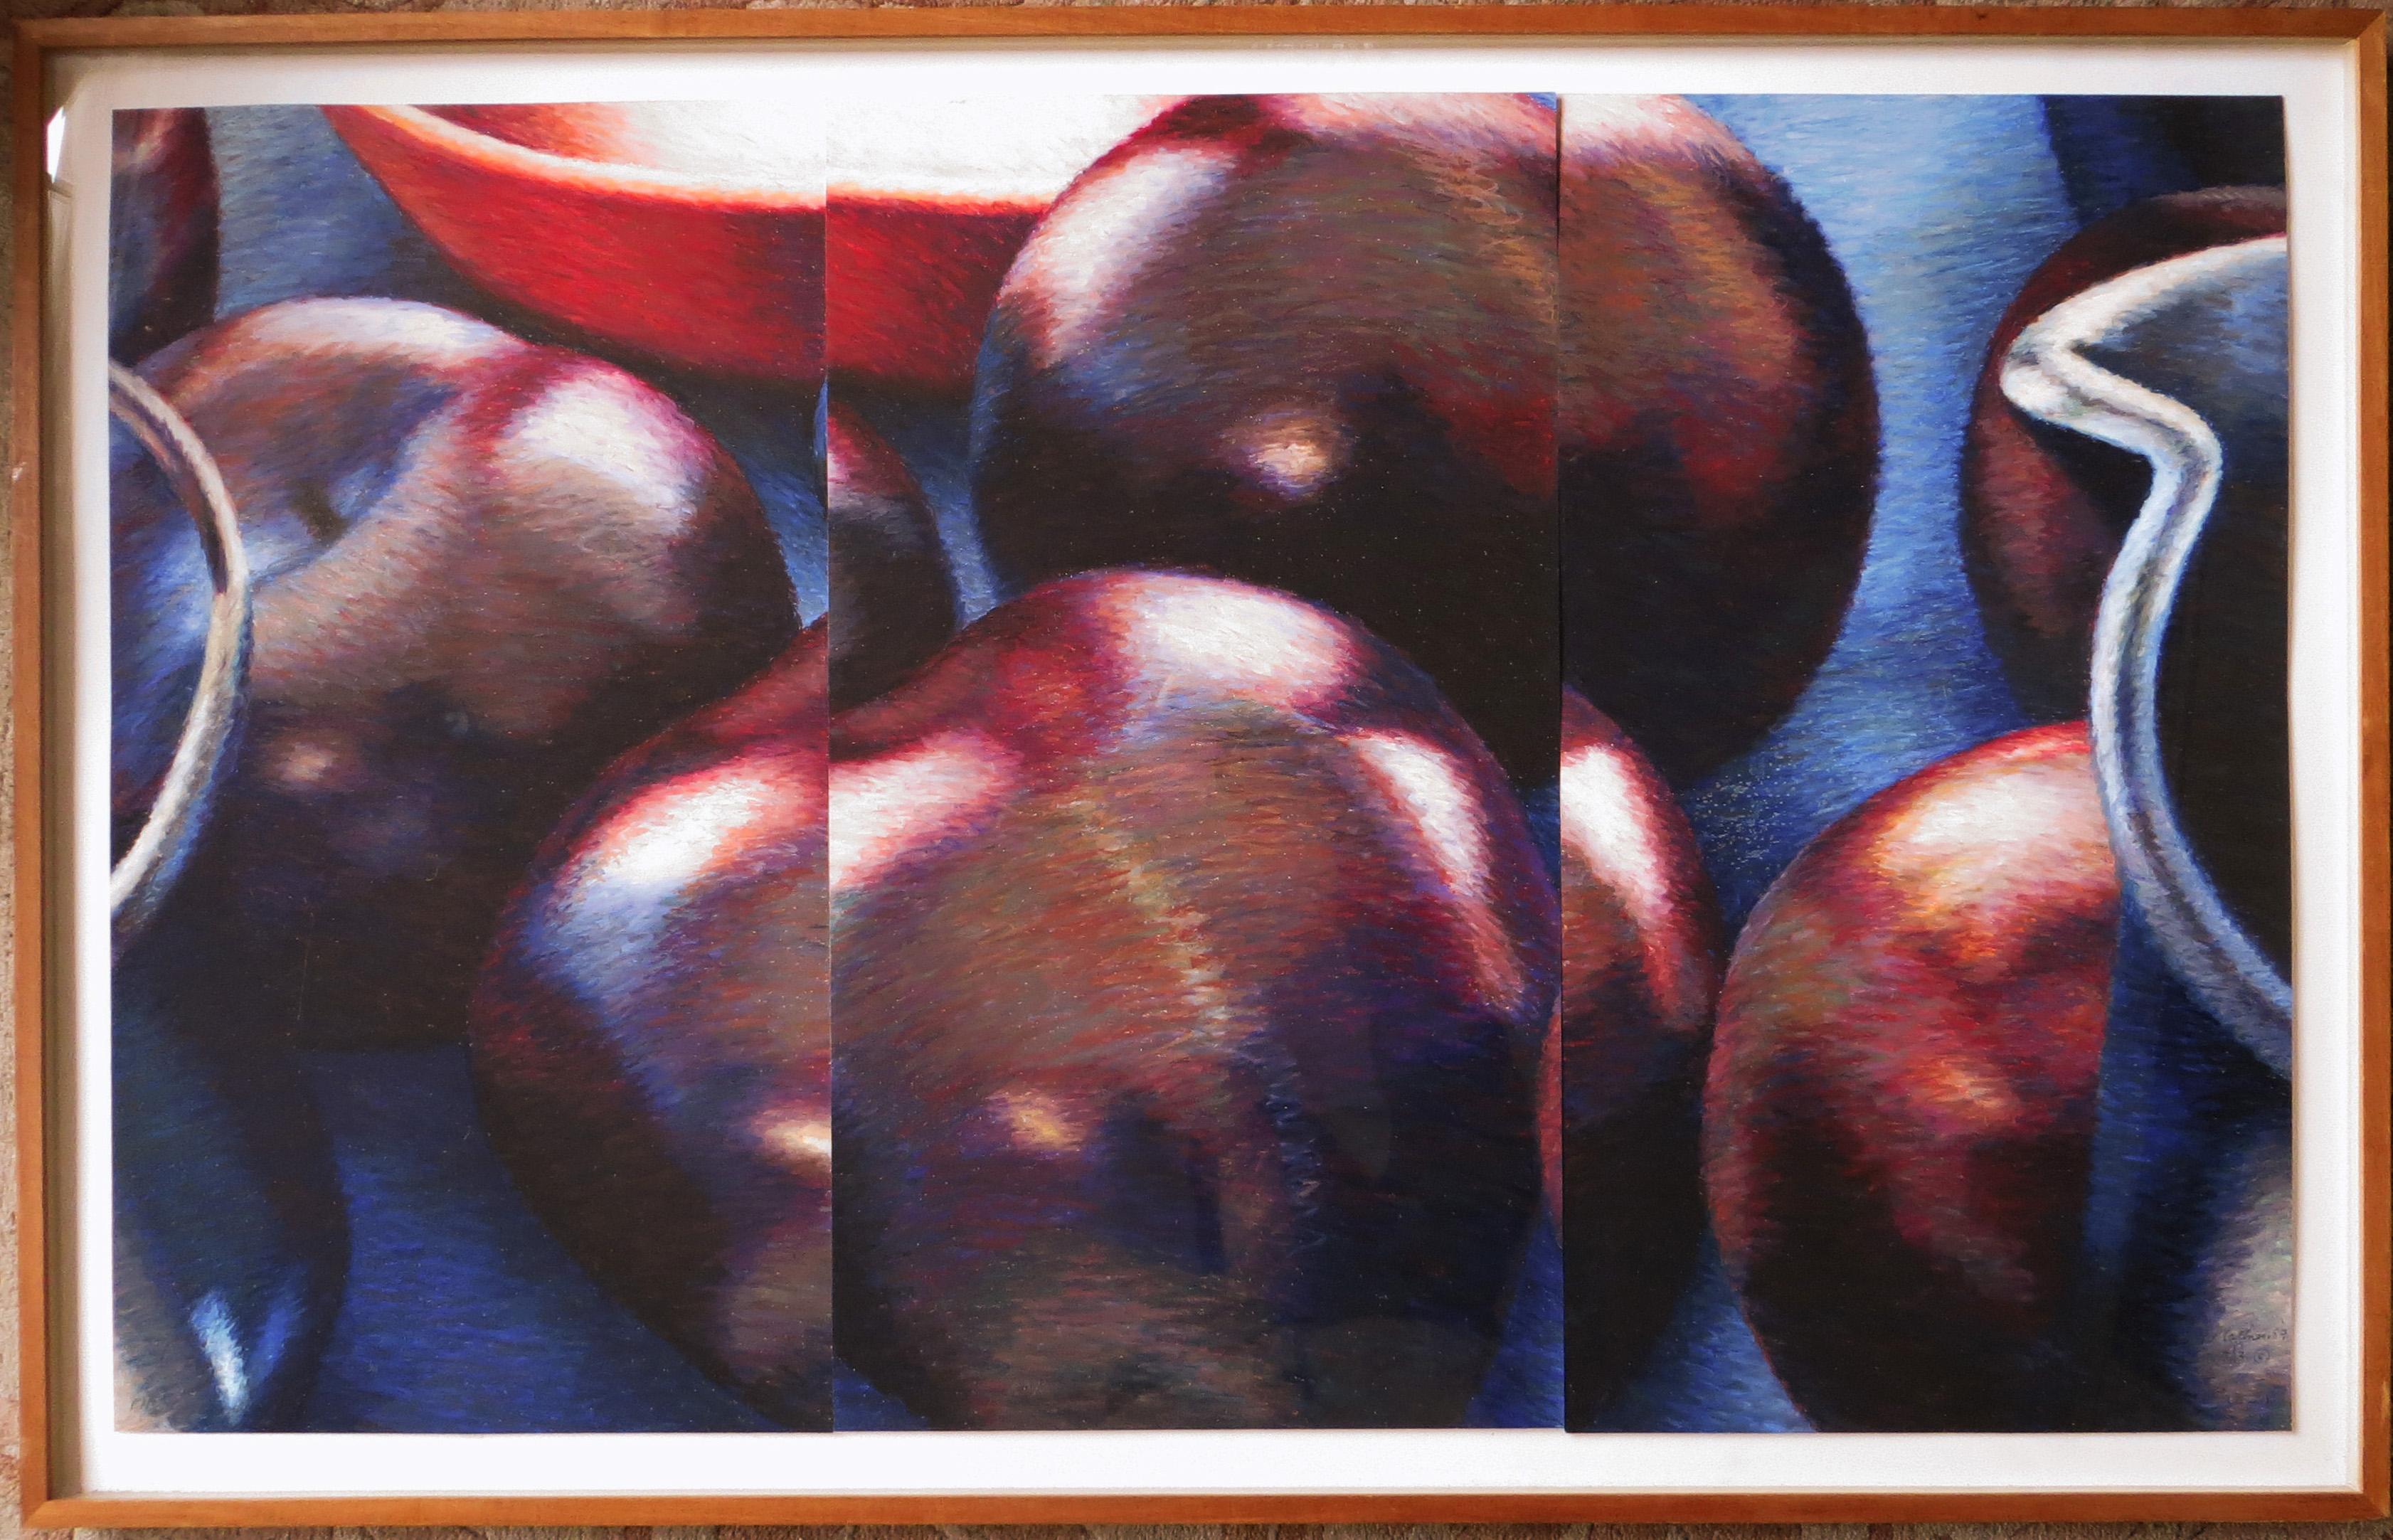 Plums #6 - Painting by Phyllis Plattner